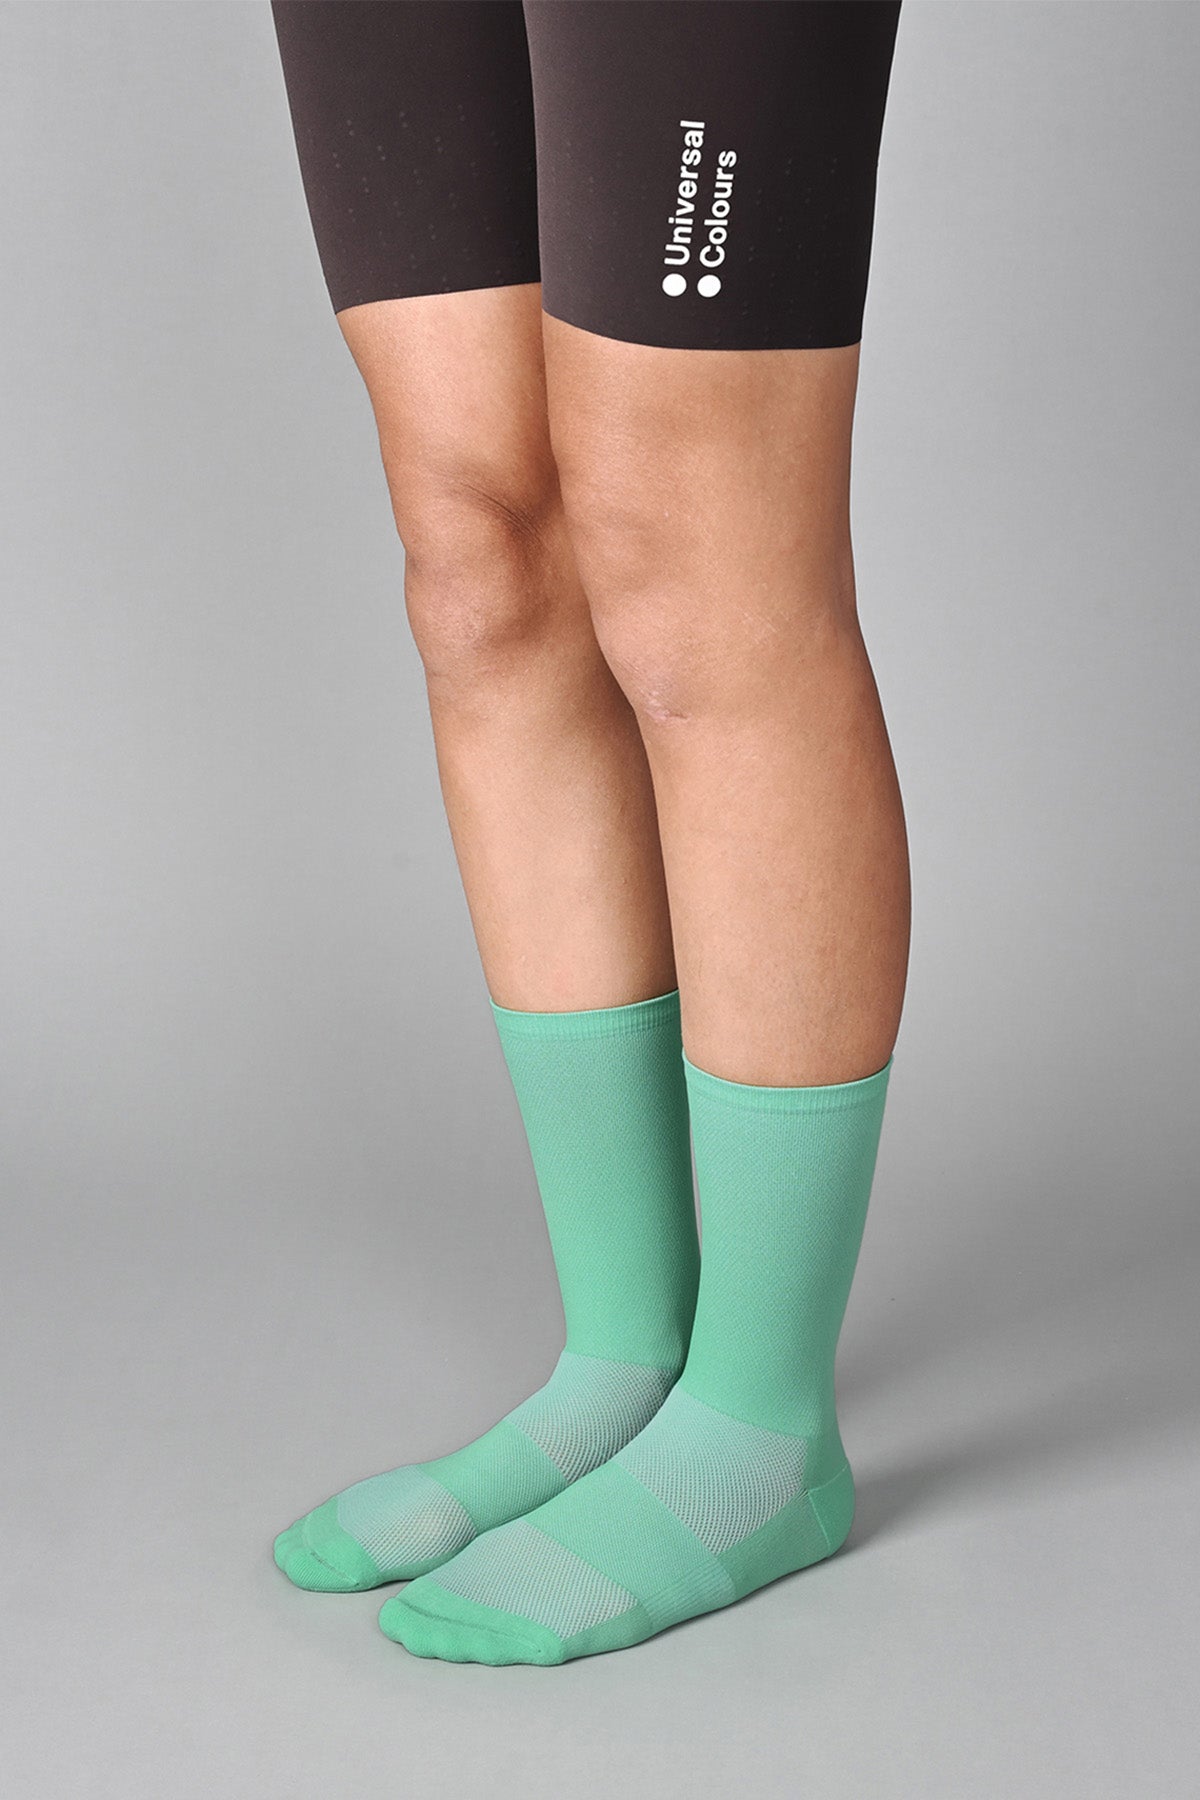 STEALTH - ANDROID GREEN FRONT SIDE | BEST CYCLING SOCKS